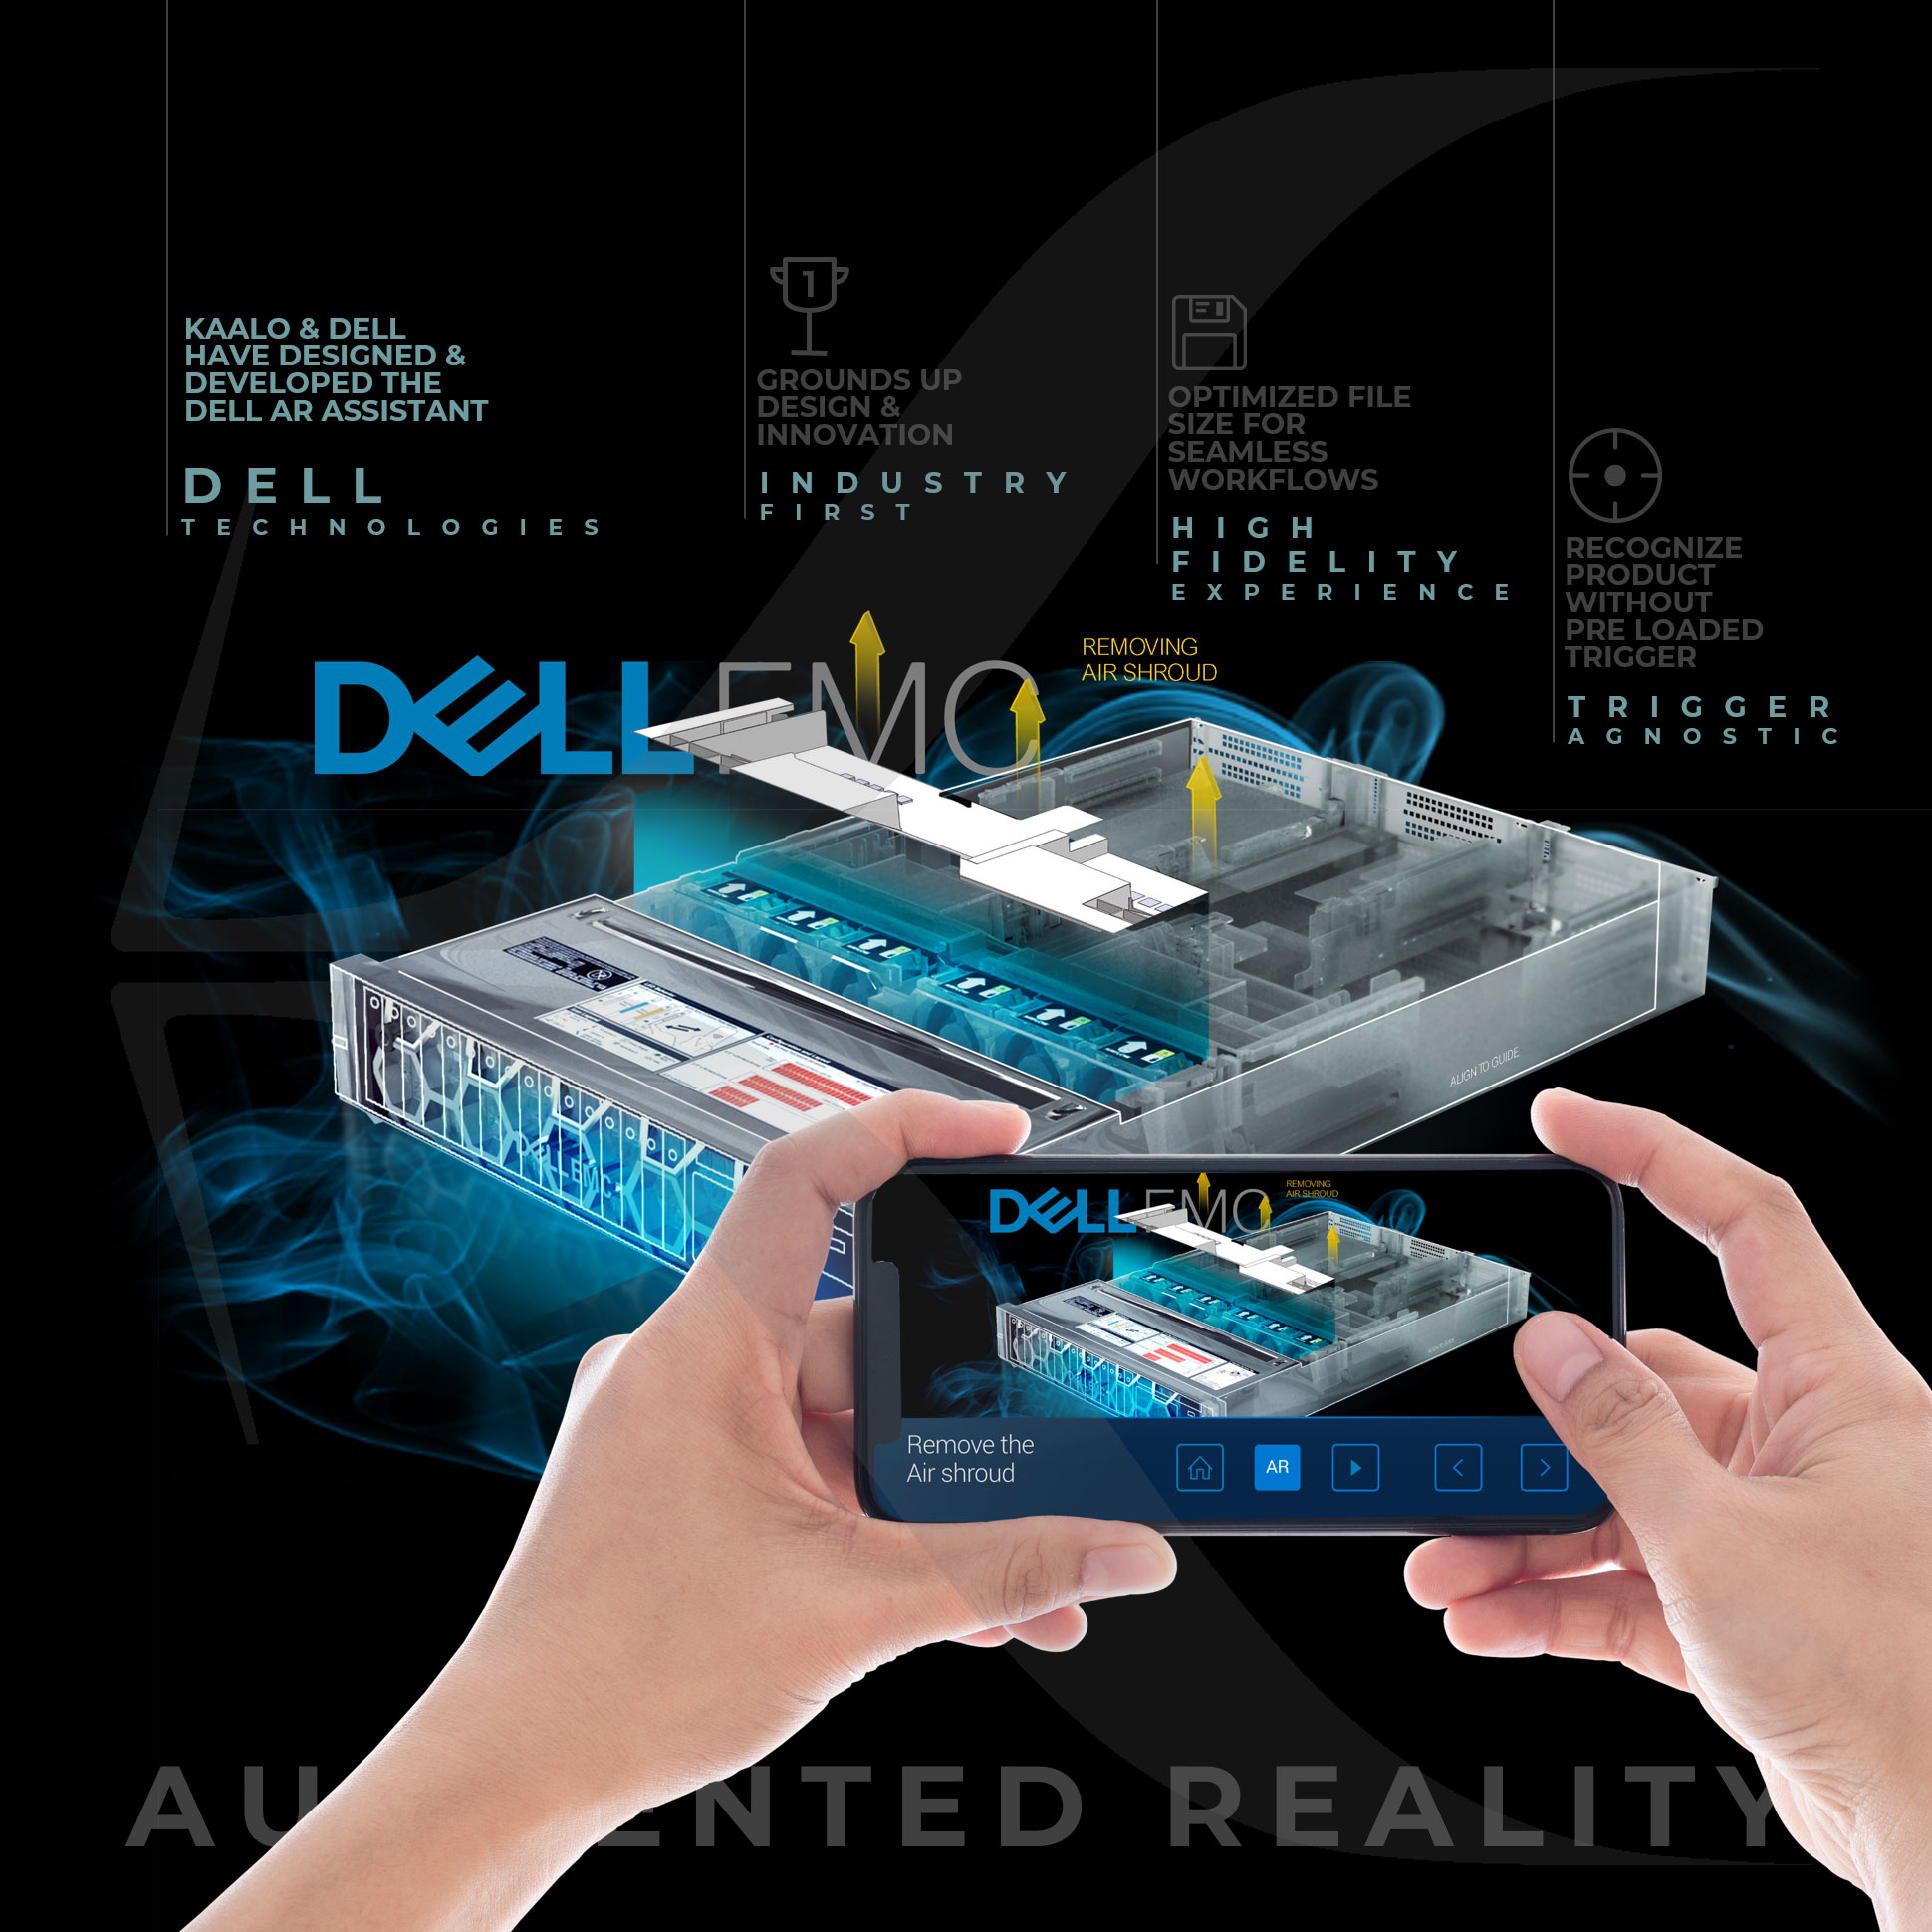 Dell AR Assistant